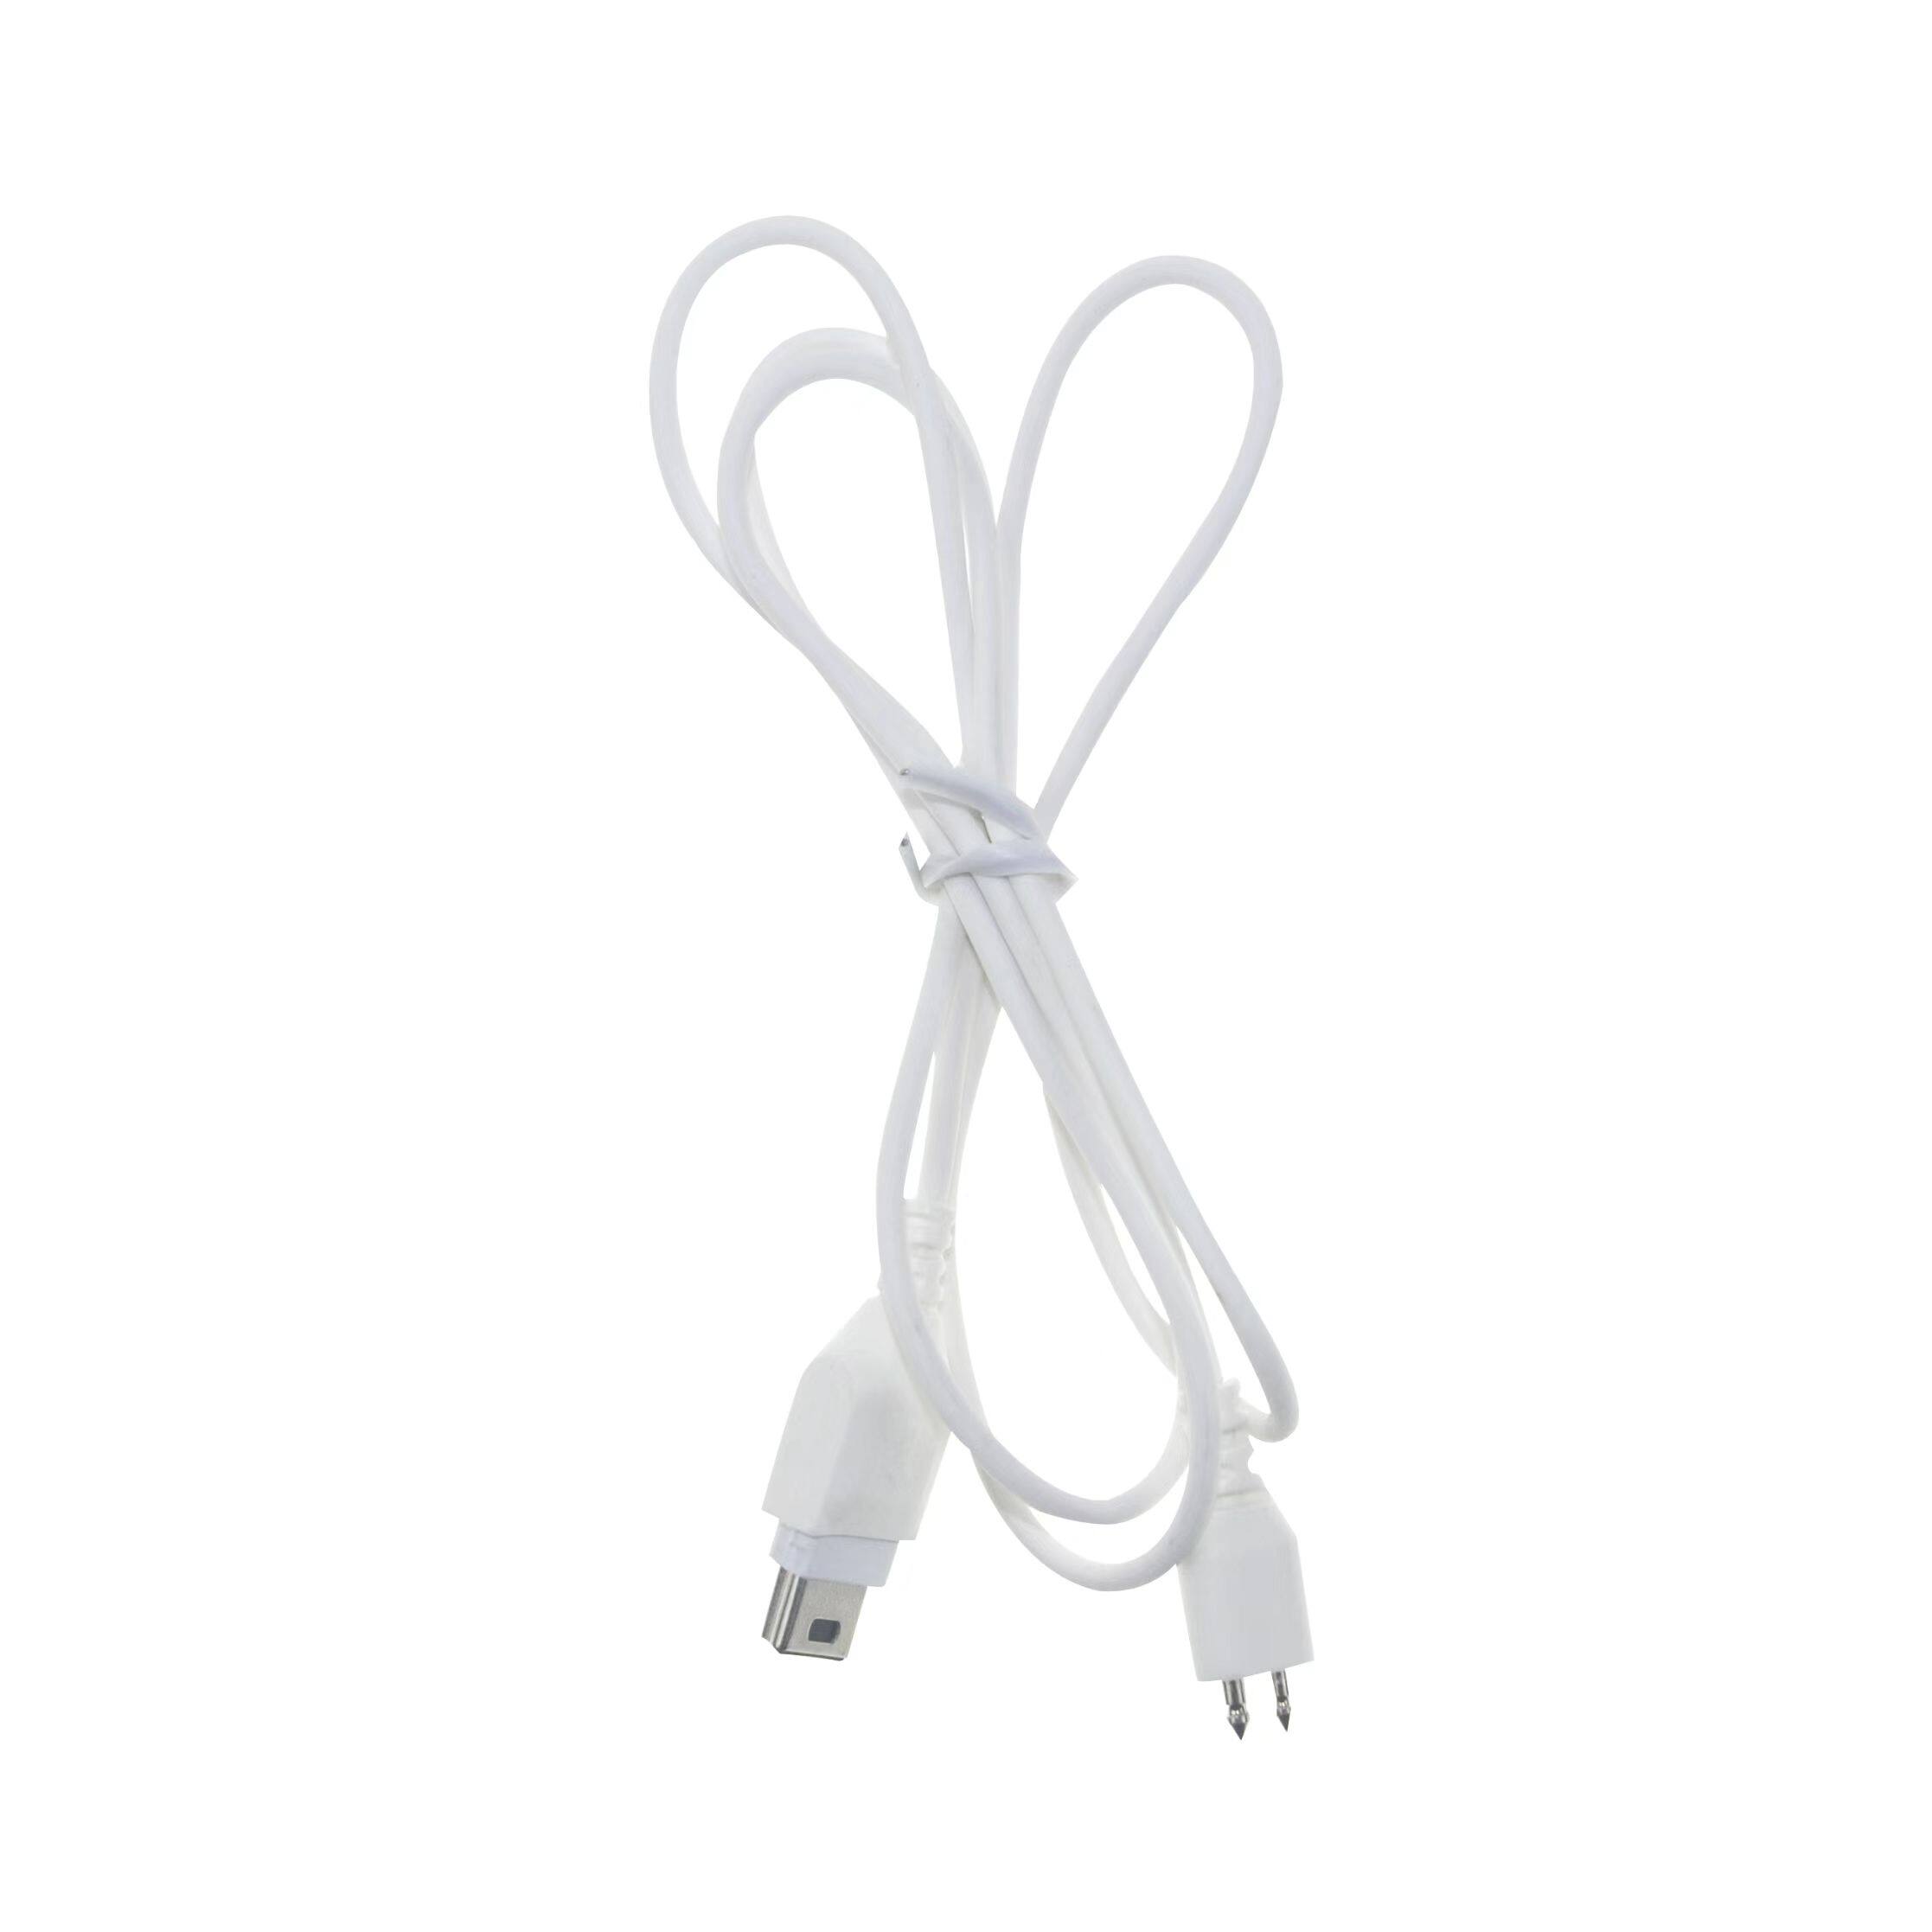 Soundlink Hearing Aid Accessories Of Usb Cable For Pocket Hearing Aids